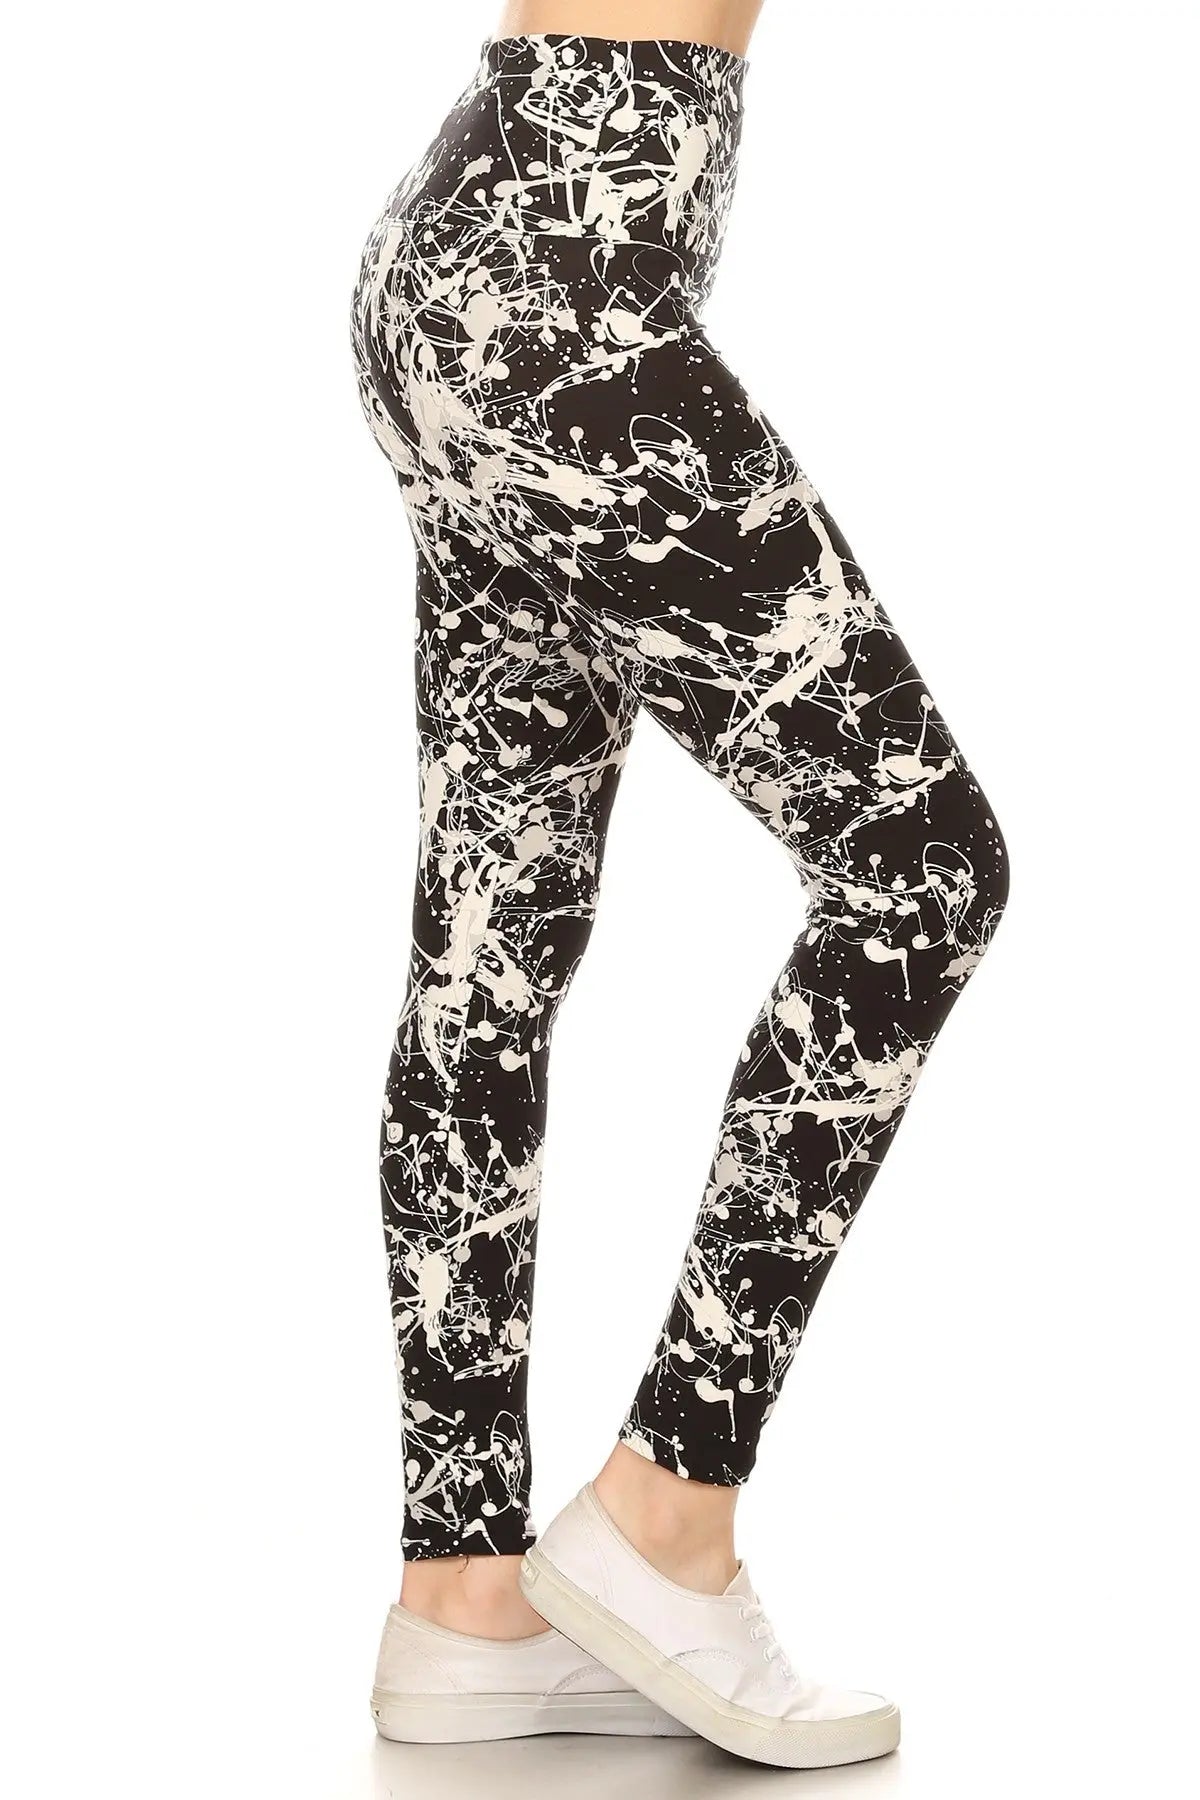 Long Yoga Style Banded Lined Paint Splatters Printed Knit Legging With High Waist Sunny EvE Fashion